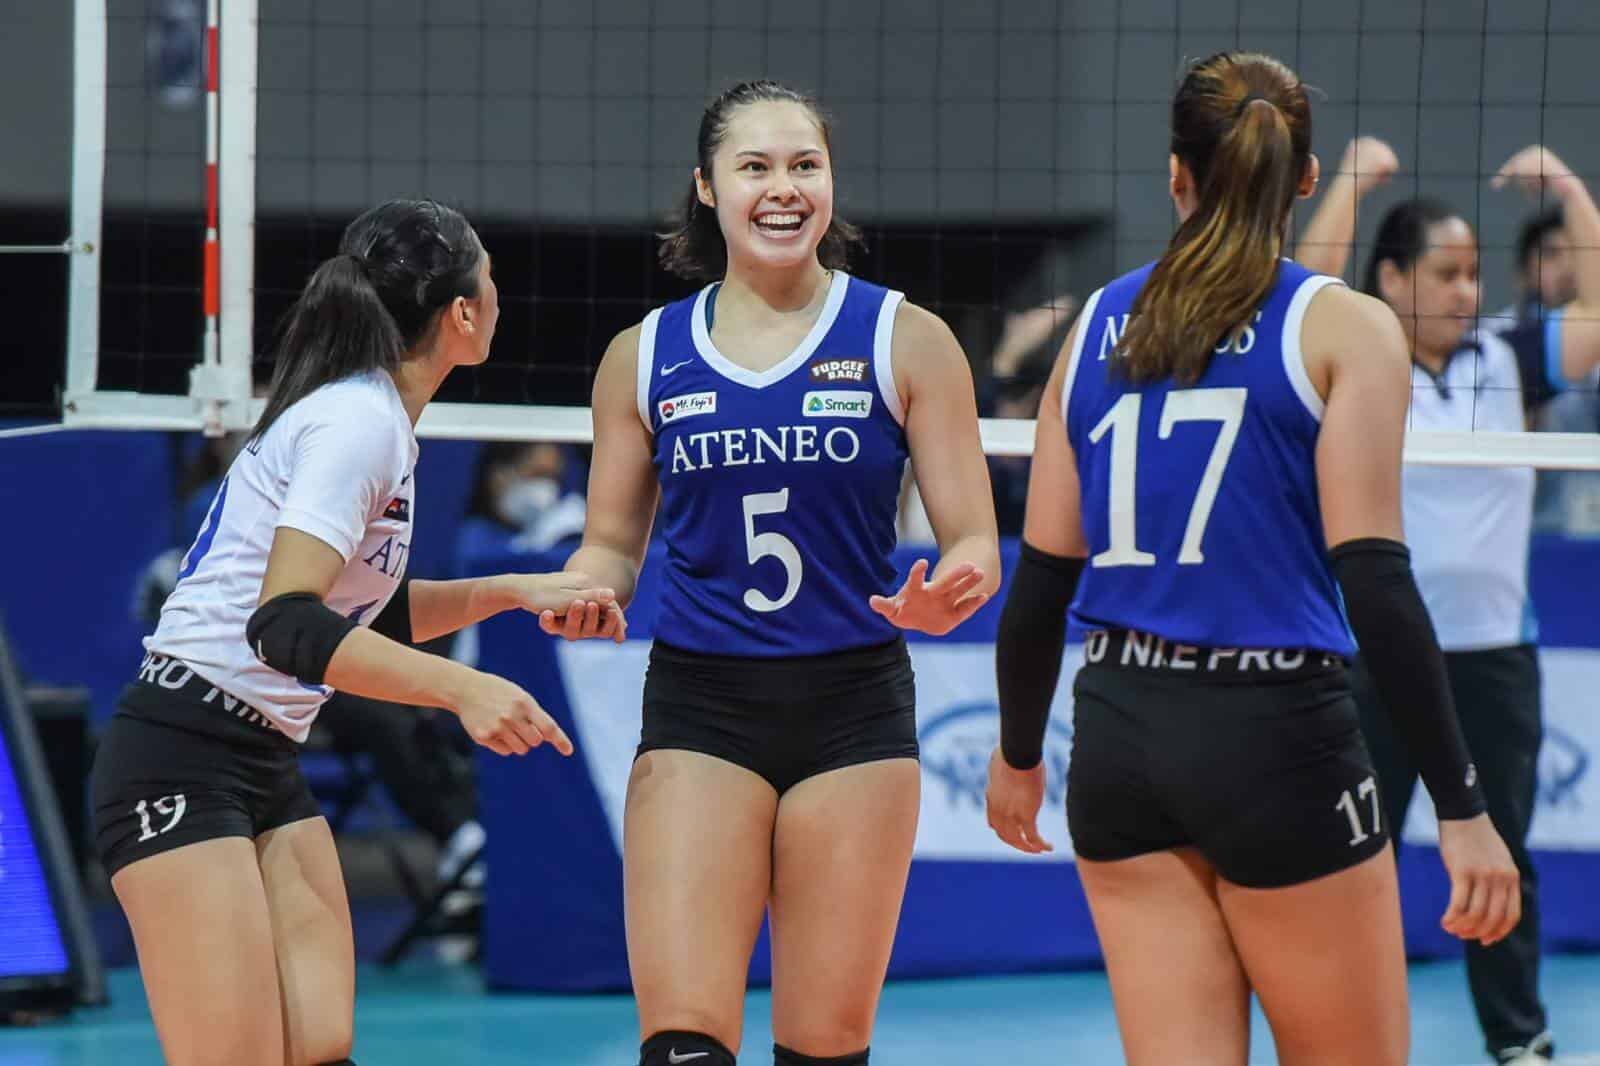 Ateneo de Manila volleyball players achieve fourth seed in UAAP Final Four, celebrating their success.